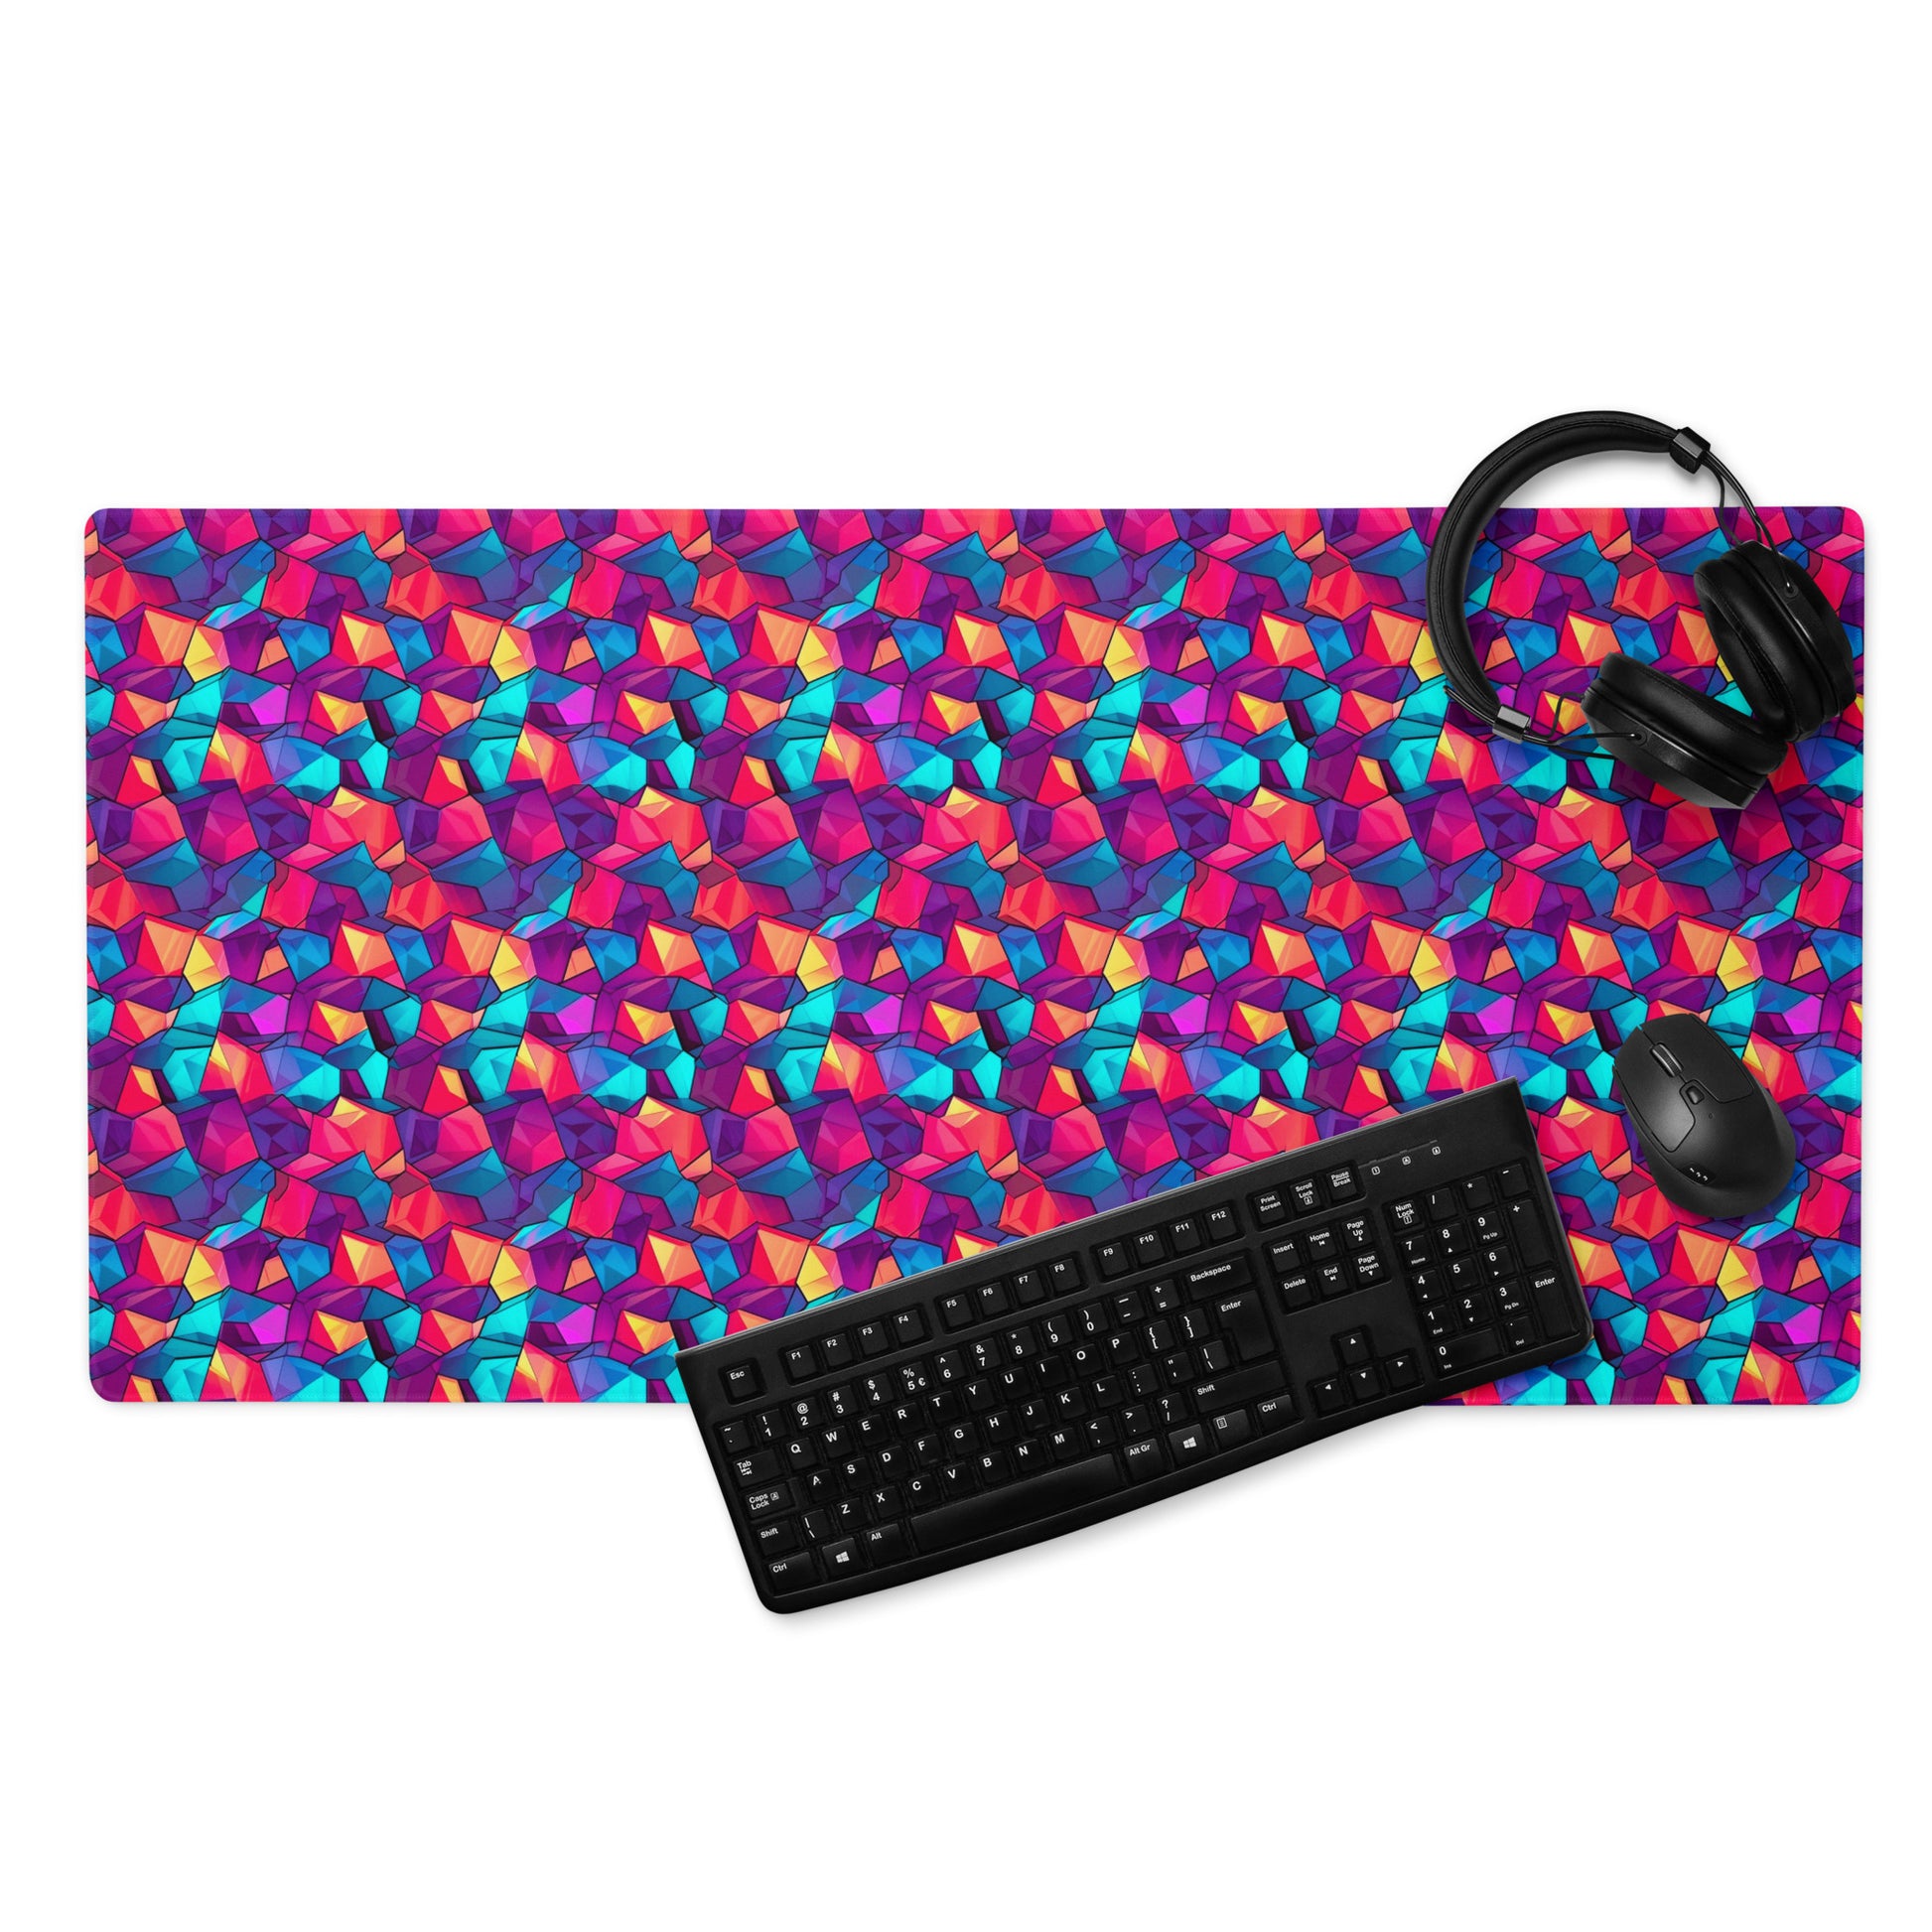 A 36" x 18" gaming desk pad with red, blue, and purple crystals. A keyboard, mouse, and headphones sit on it.